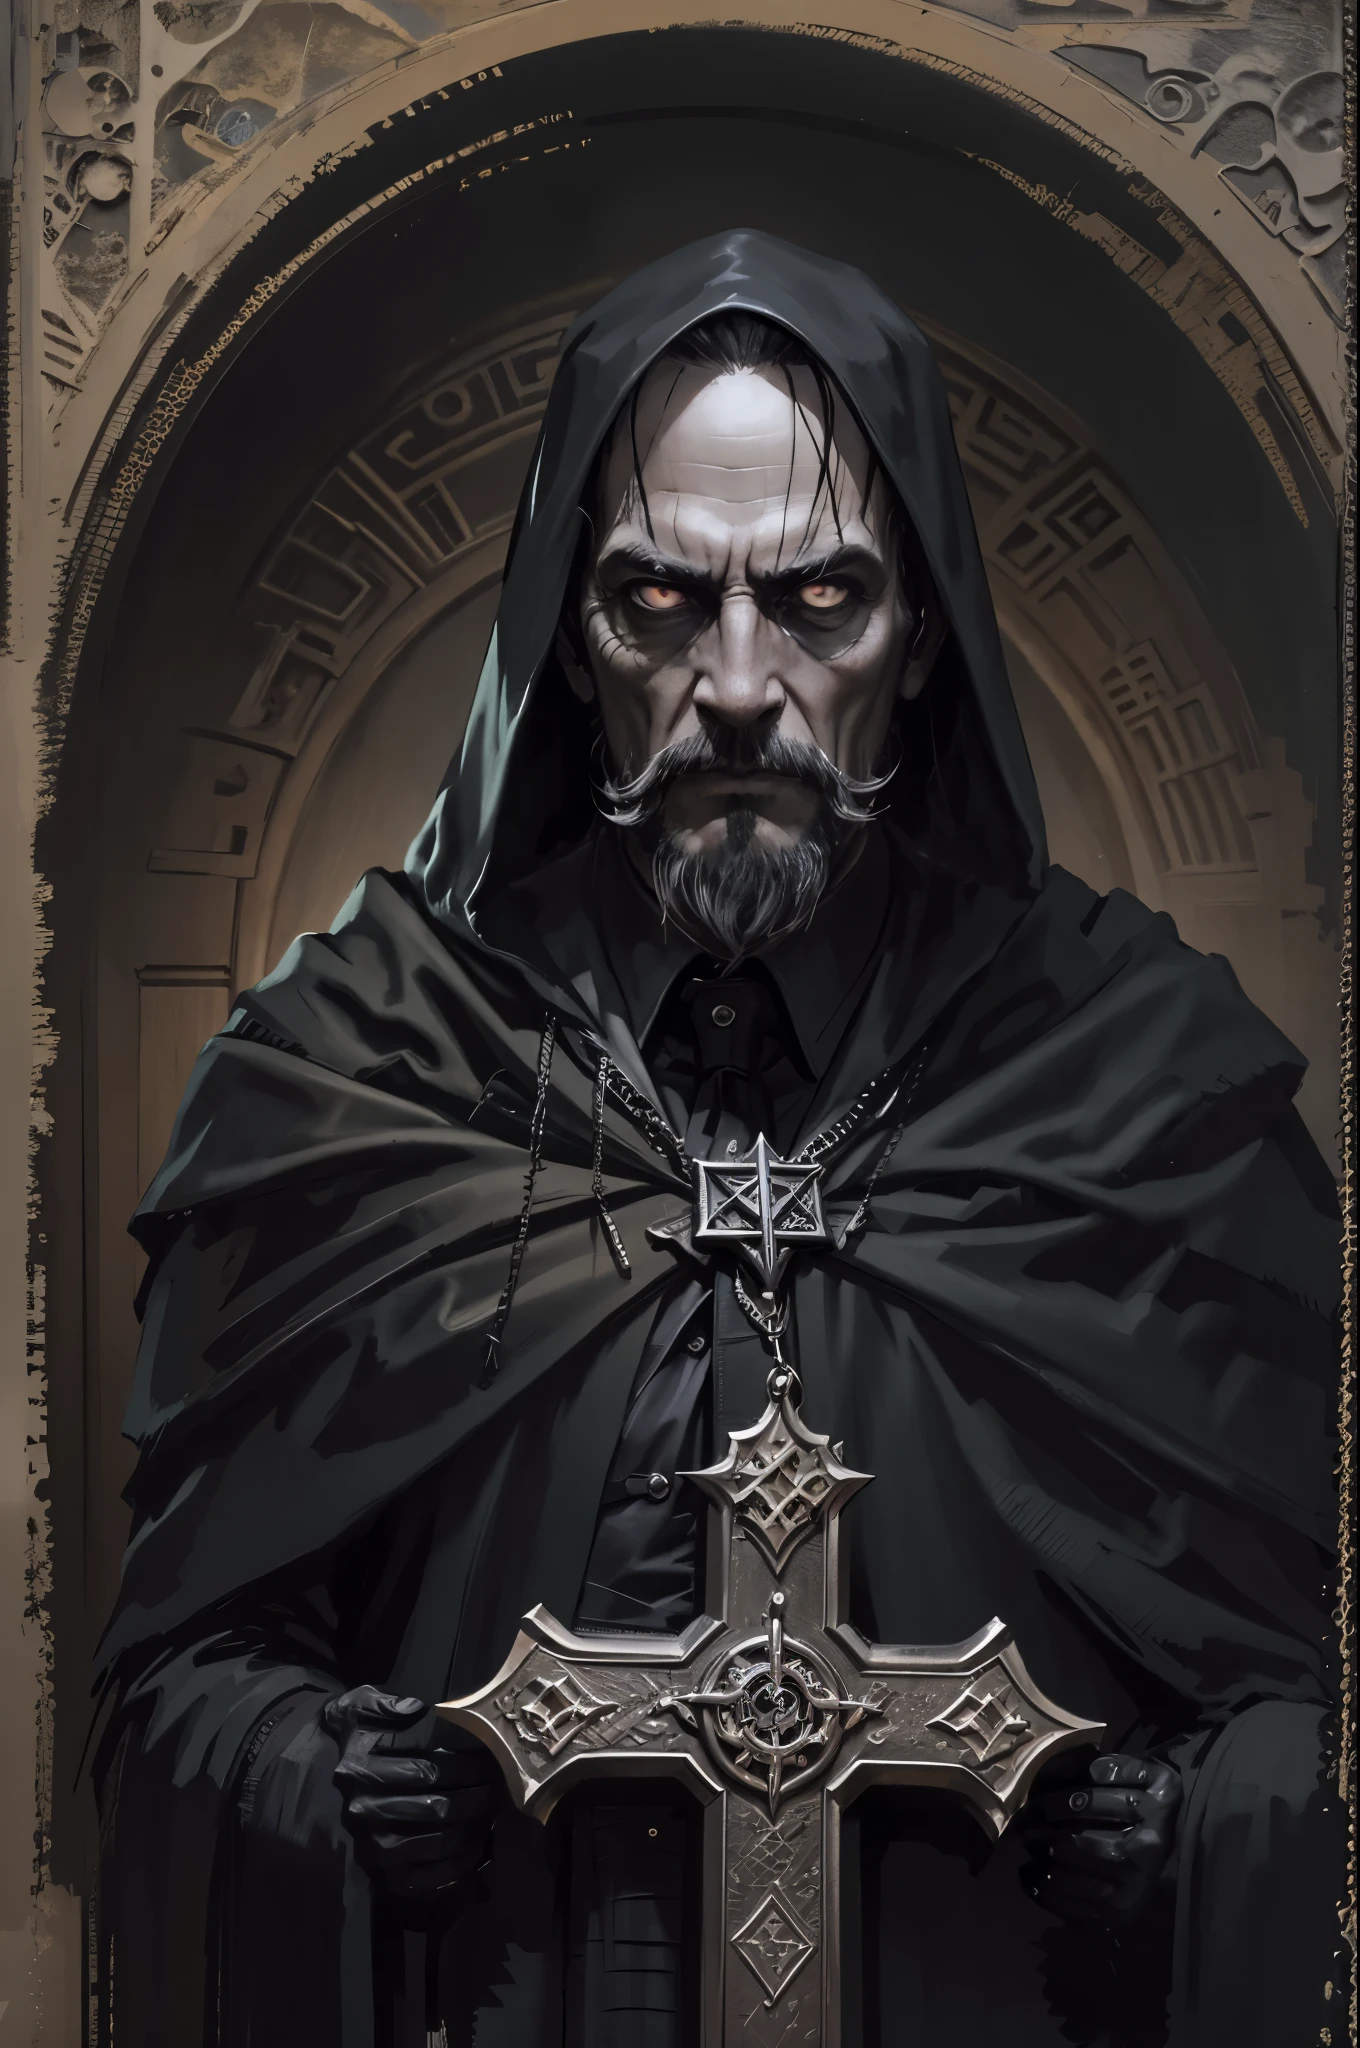 portrait of a mature man 50 years old, With the Cross, готическое Face, gothic horror atmosphere, ominous gothic aesthetics, gloomy black eyes, Small, clearly defined beard and mustache., round sunglasses, gothic art style, creepy gothic portrait, with black eyes, dark fantasy, mixed with realism, gothic aesthetics, God of death, Dark and scary style, with black scleral eyes,  Face. Realistic black leather.